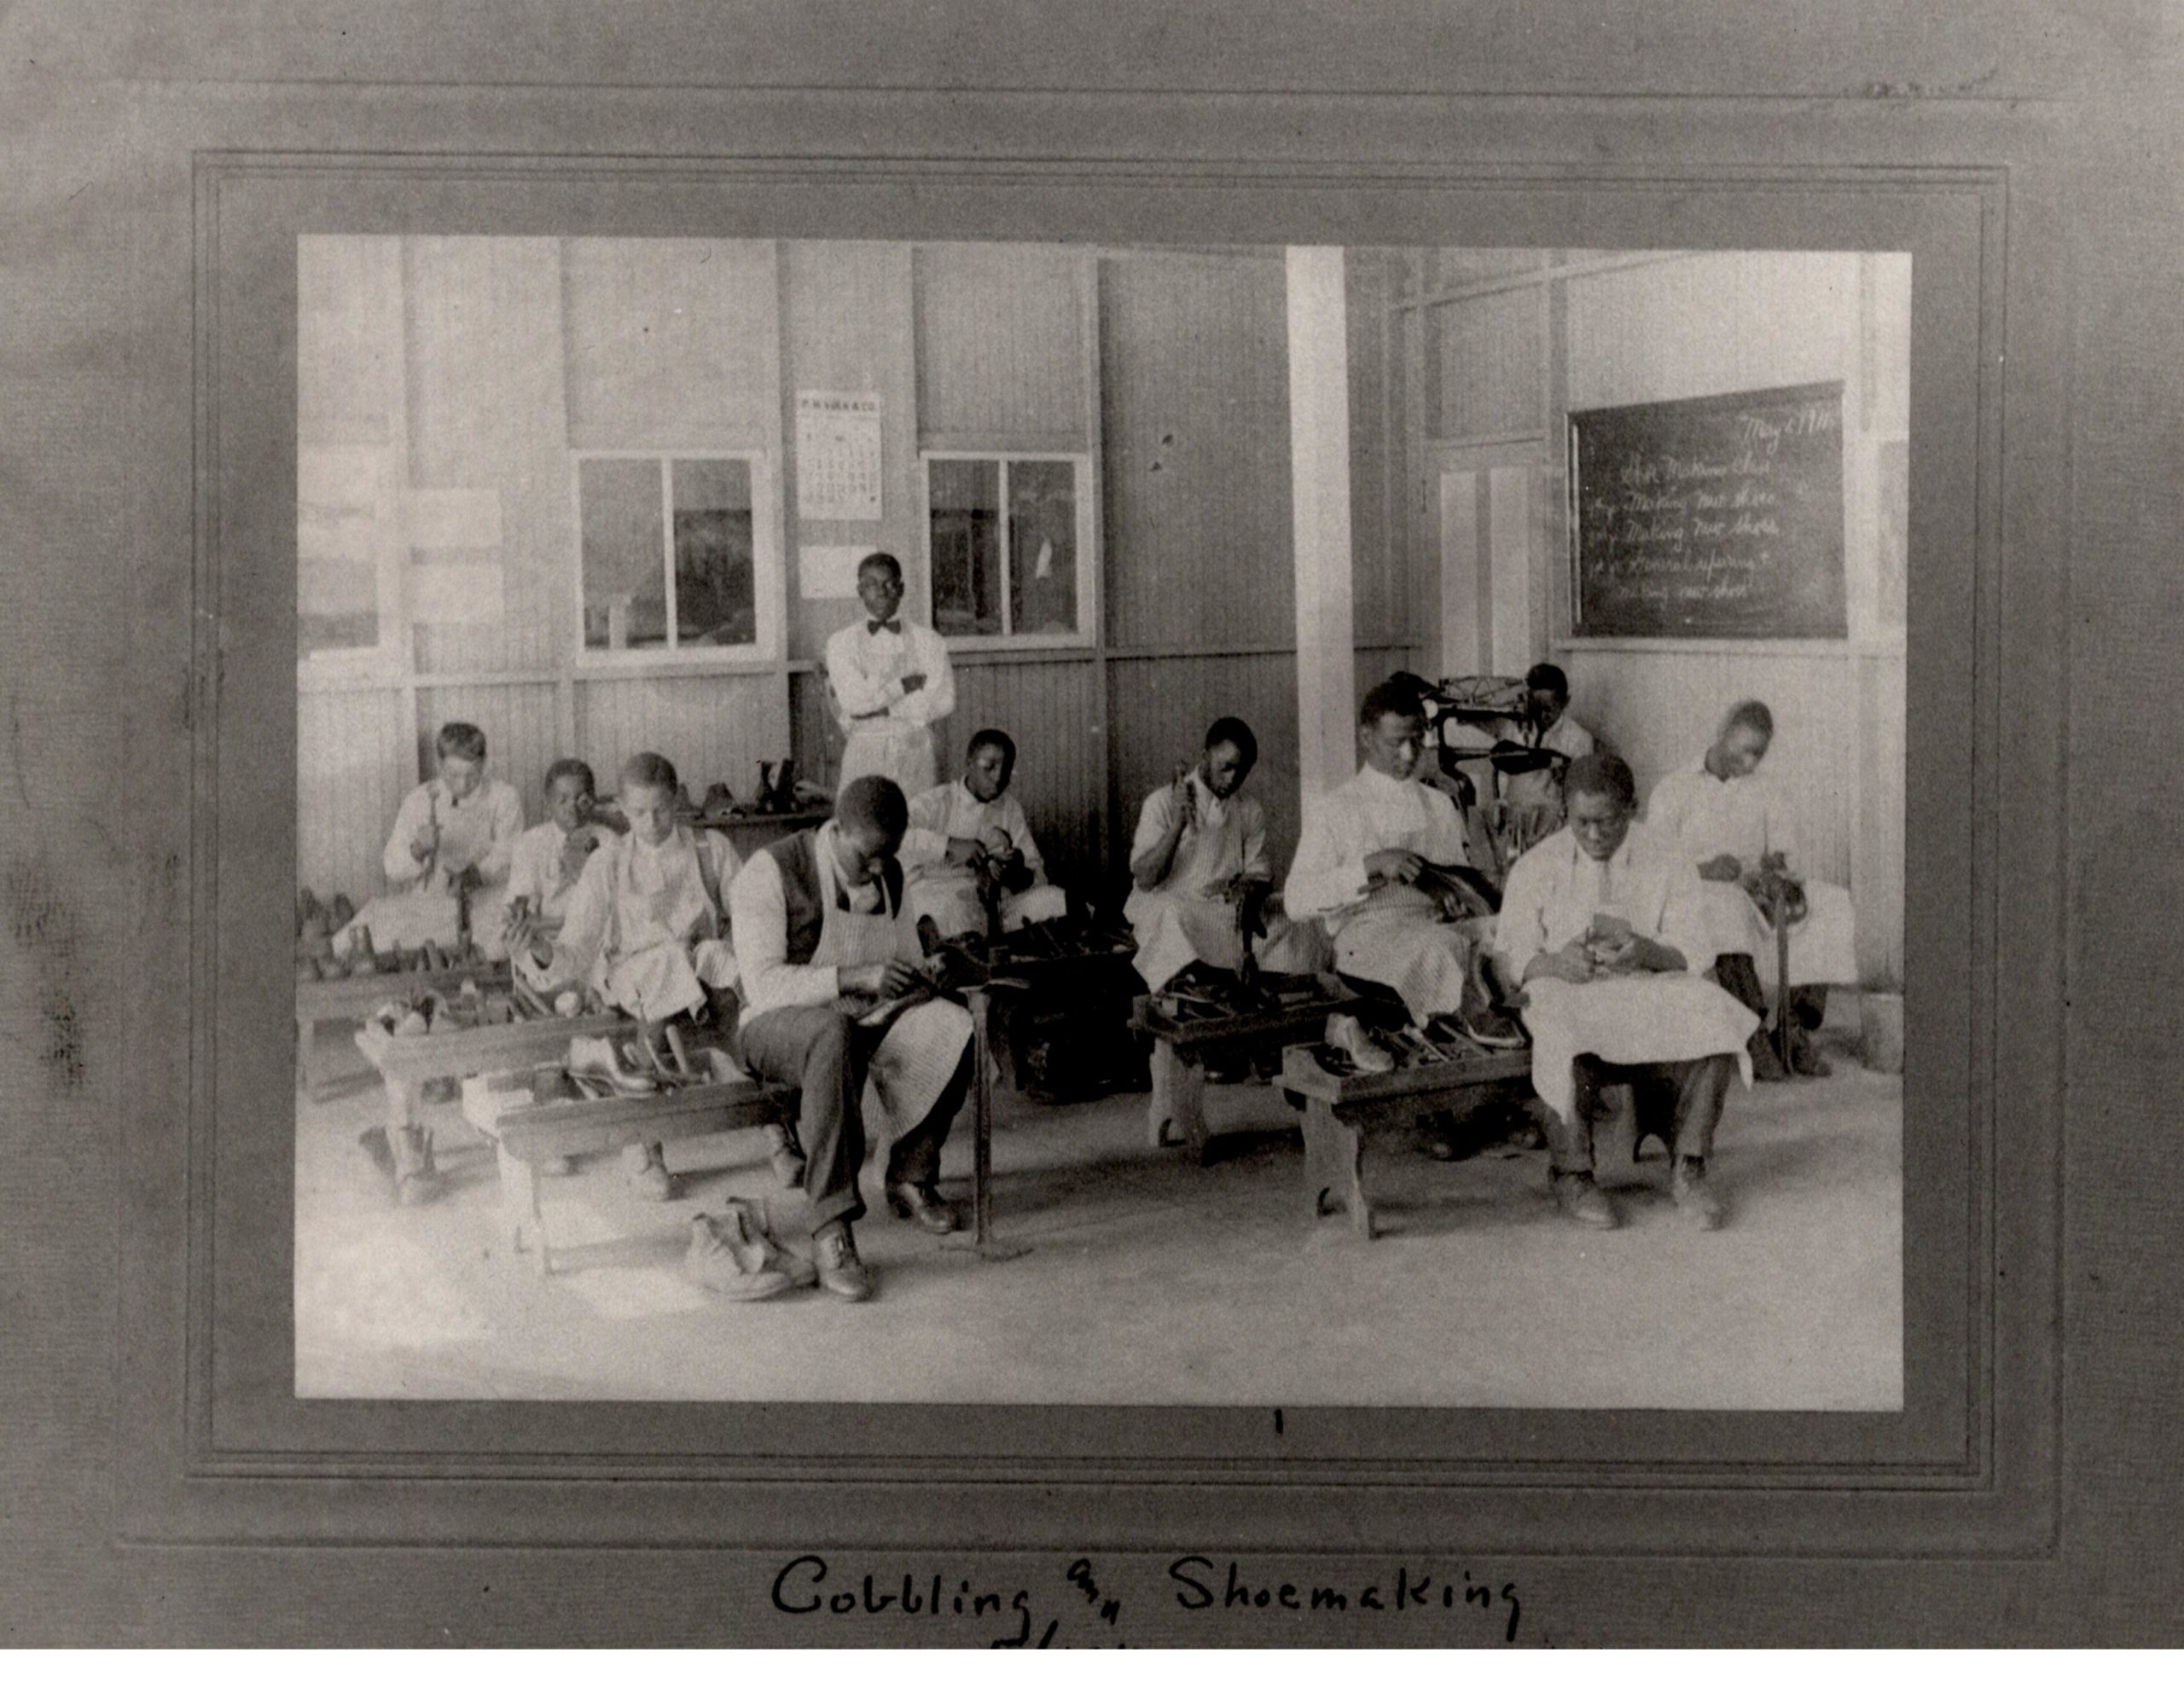 Jennie Dean shoemaking at Manassas Industrial SchoolThe Manassas Industrial School, one of the few places in the region where Black students could attend high school. It was chartered in October 1893, largely through the fundraising efforts of Jennie Dean, a formerly enslaved woman. The school offered classes such as cooking and carpentry. Source: The Manassas Museum System.